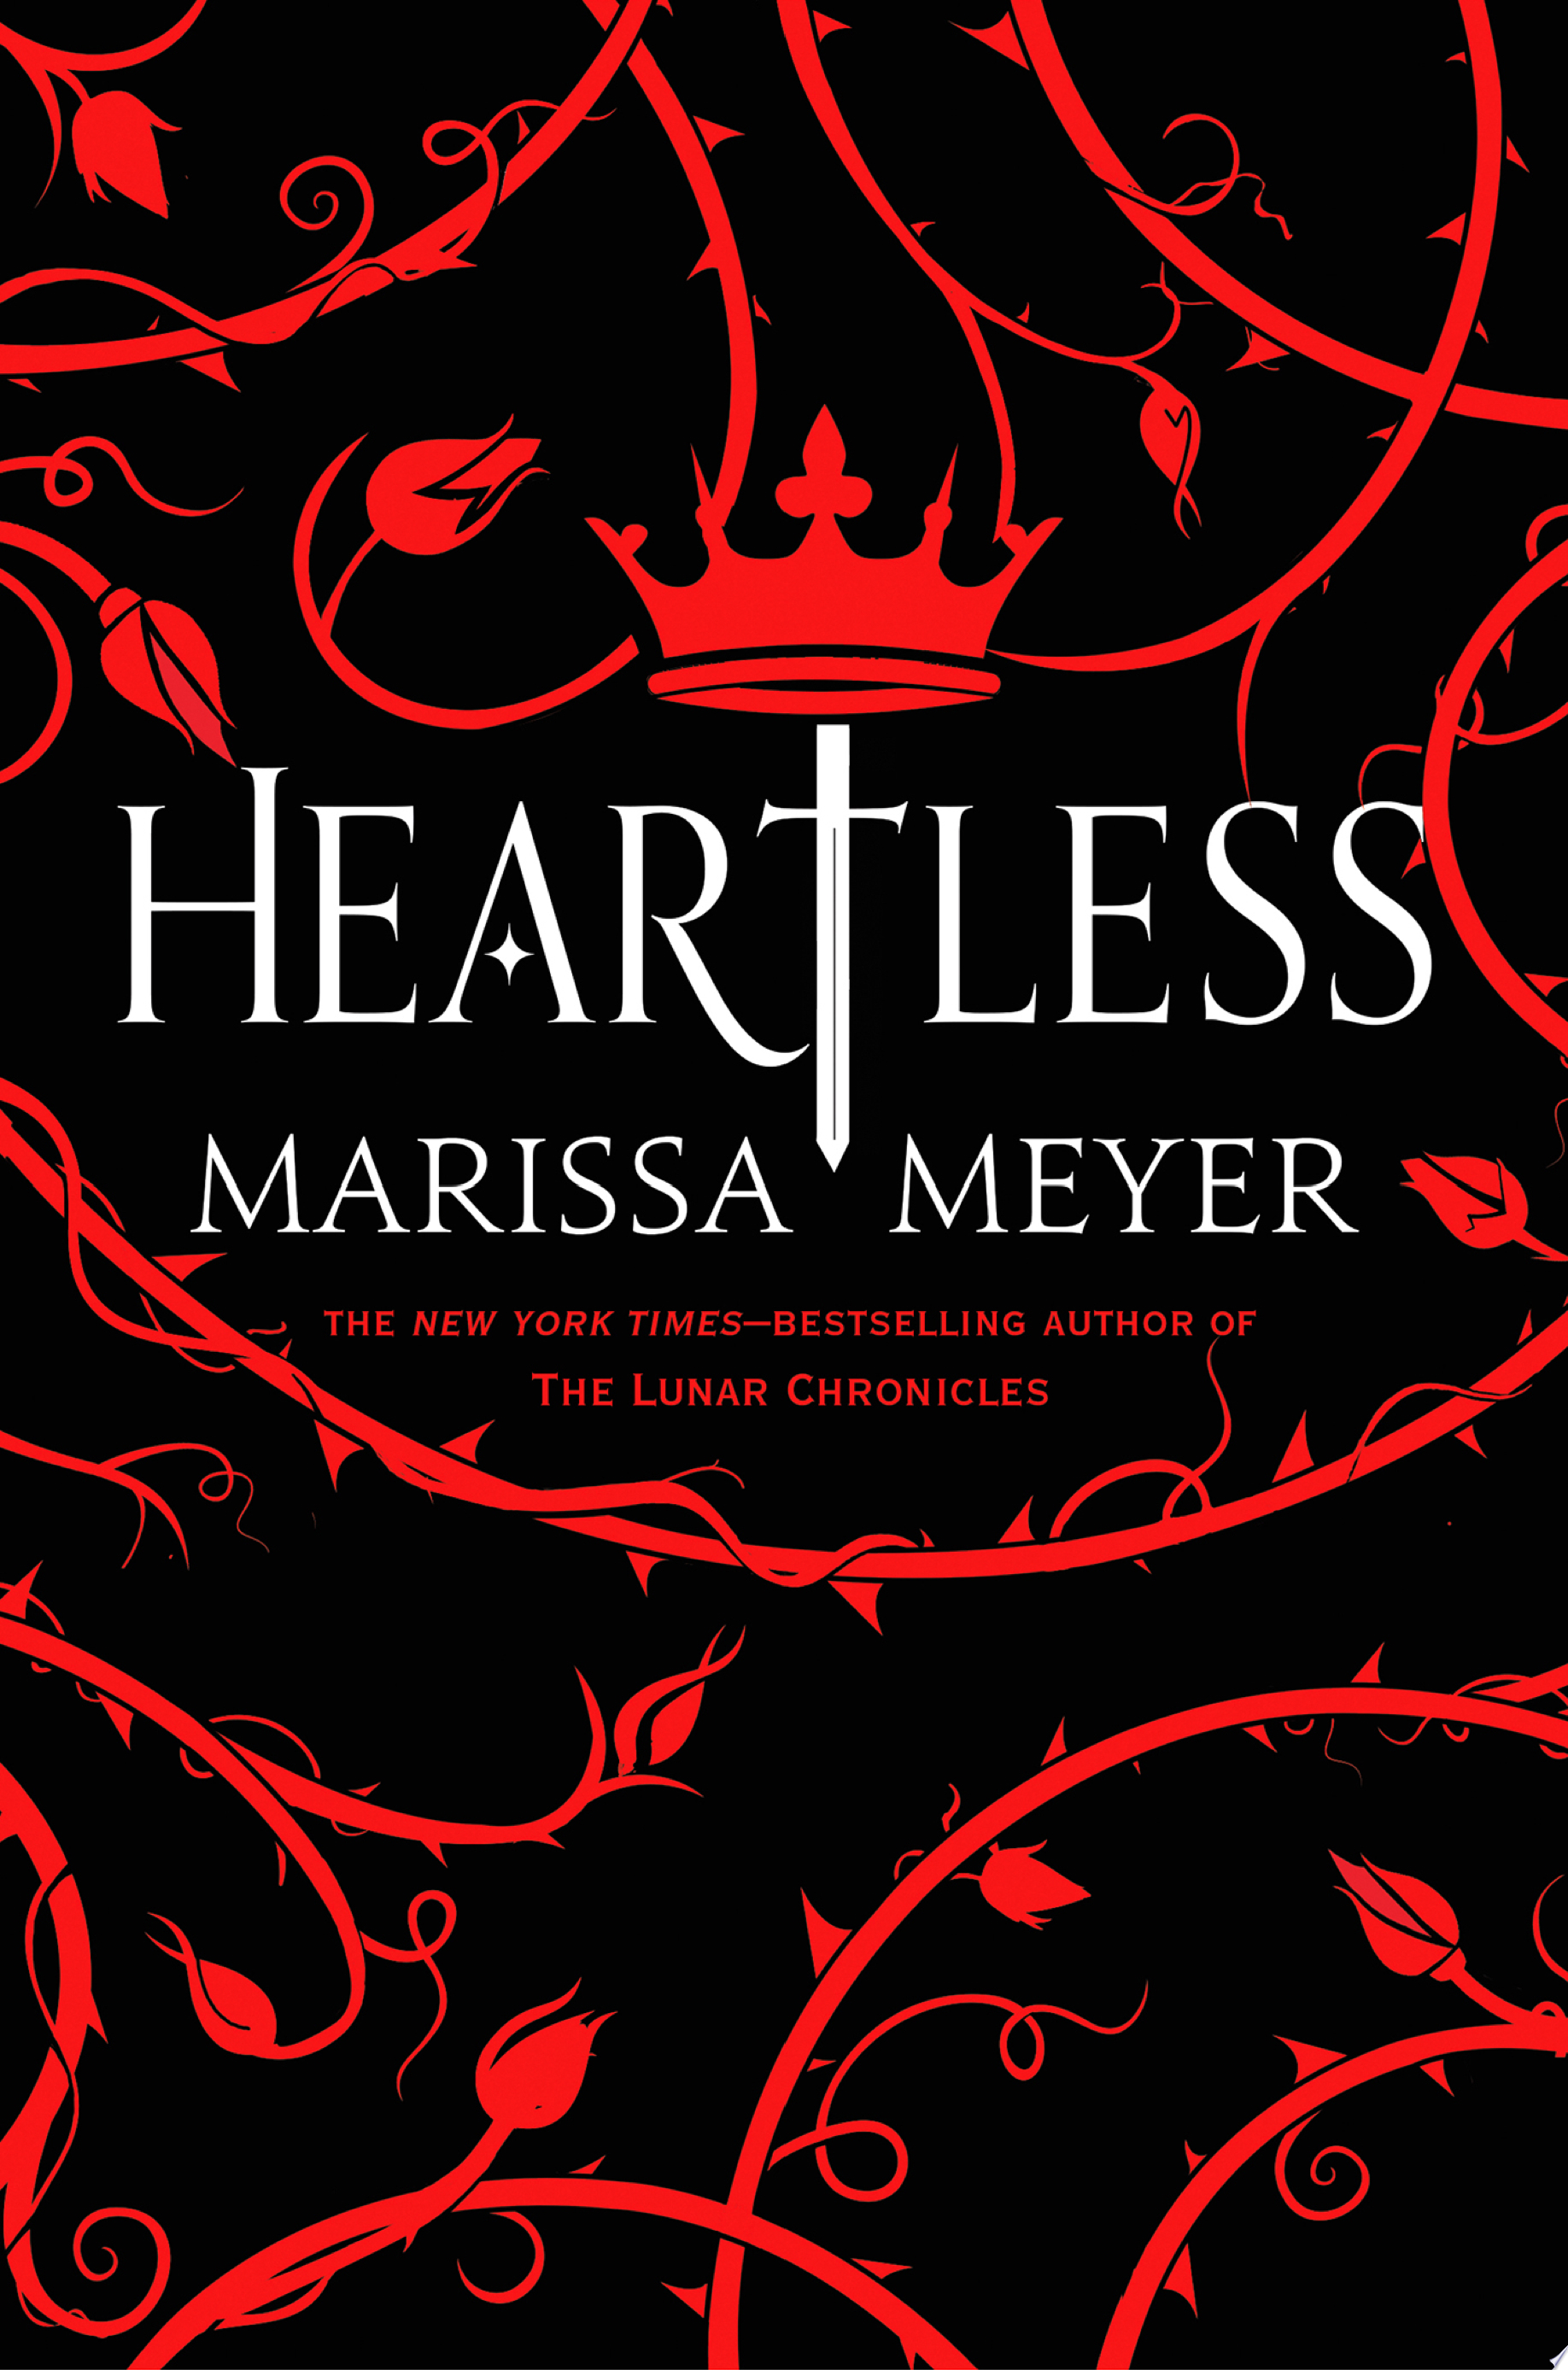 Image for "Heartless"